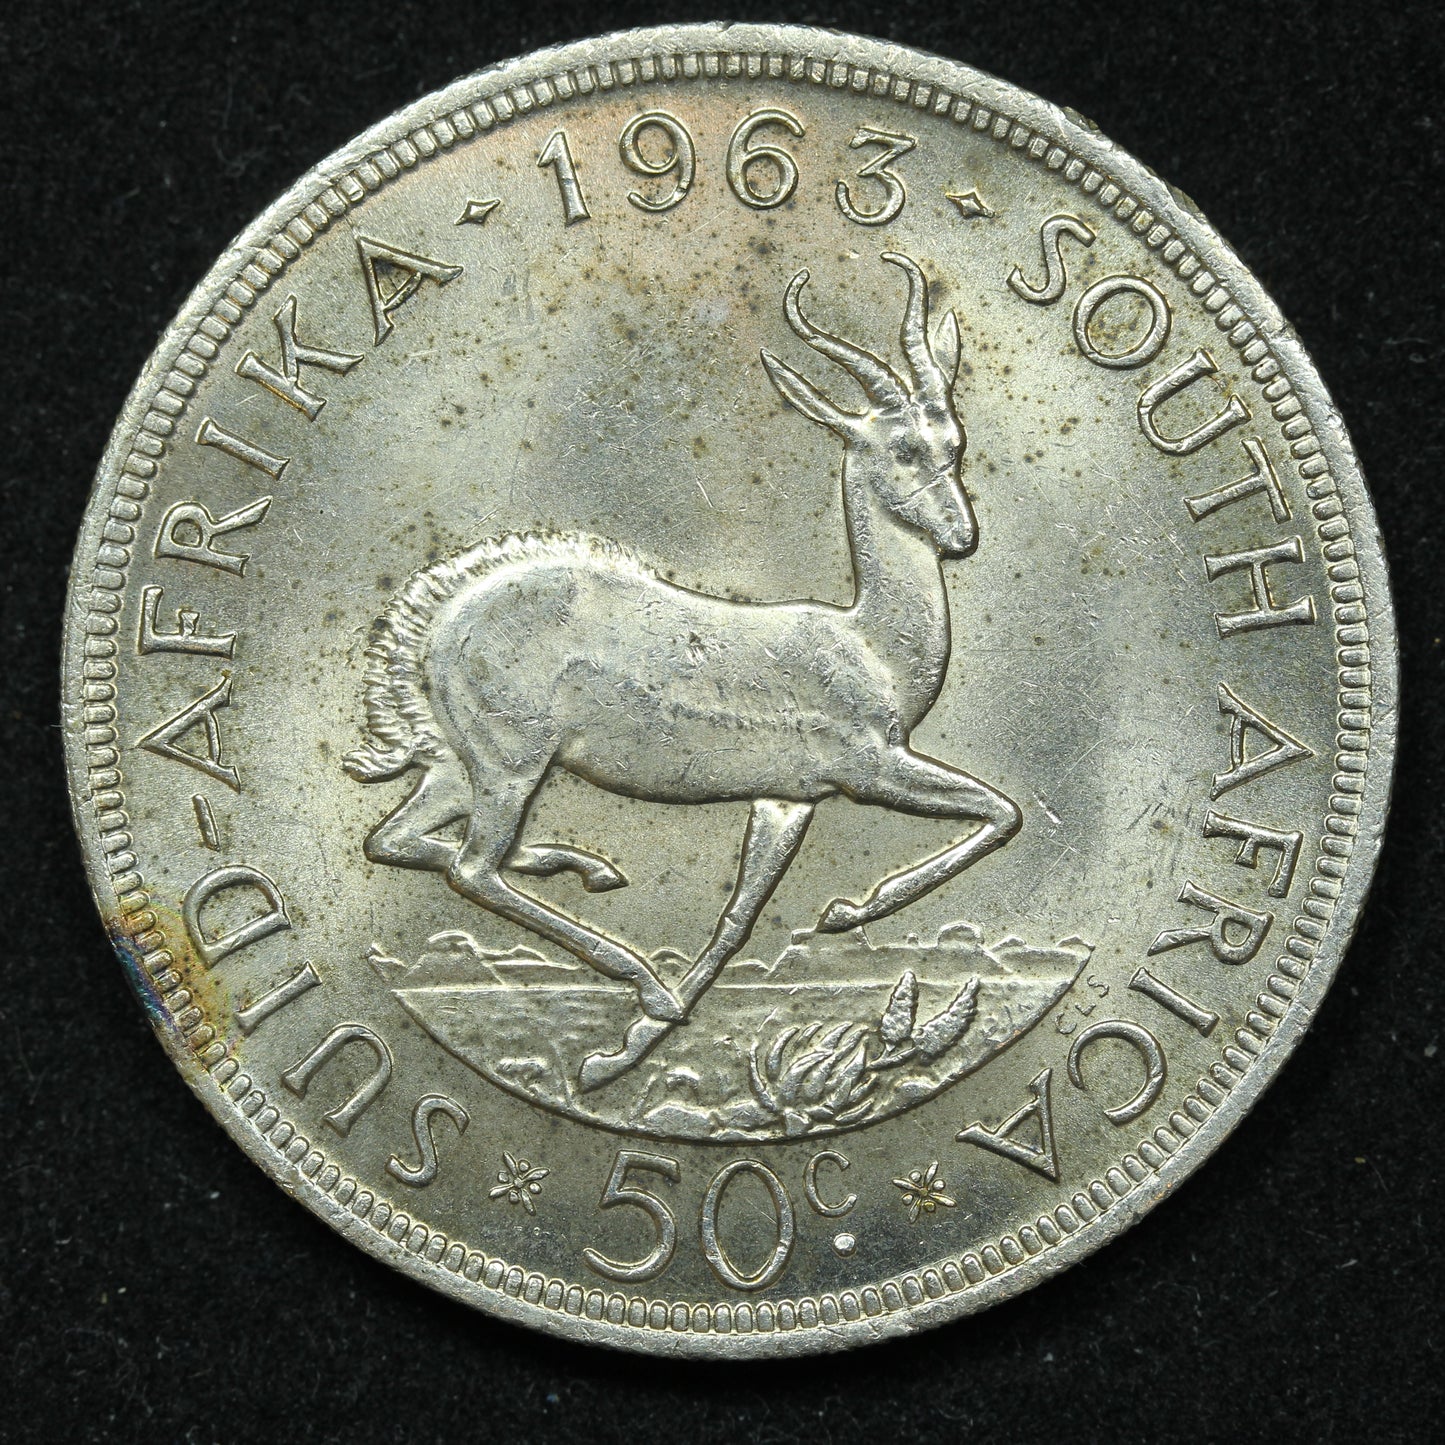 1963 South Africa 50 Fifty Cents Silver Coin - KM# 62